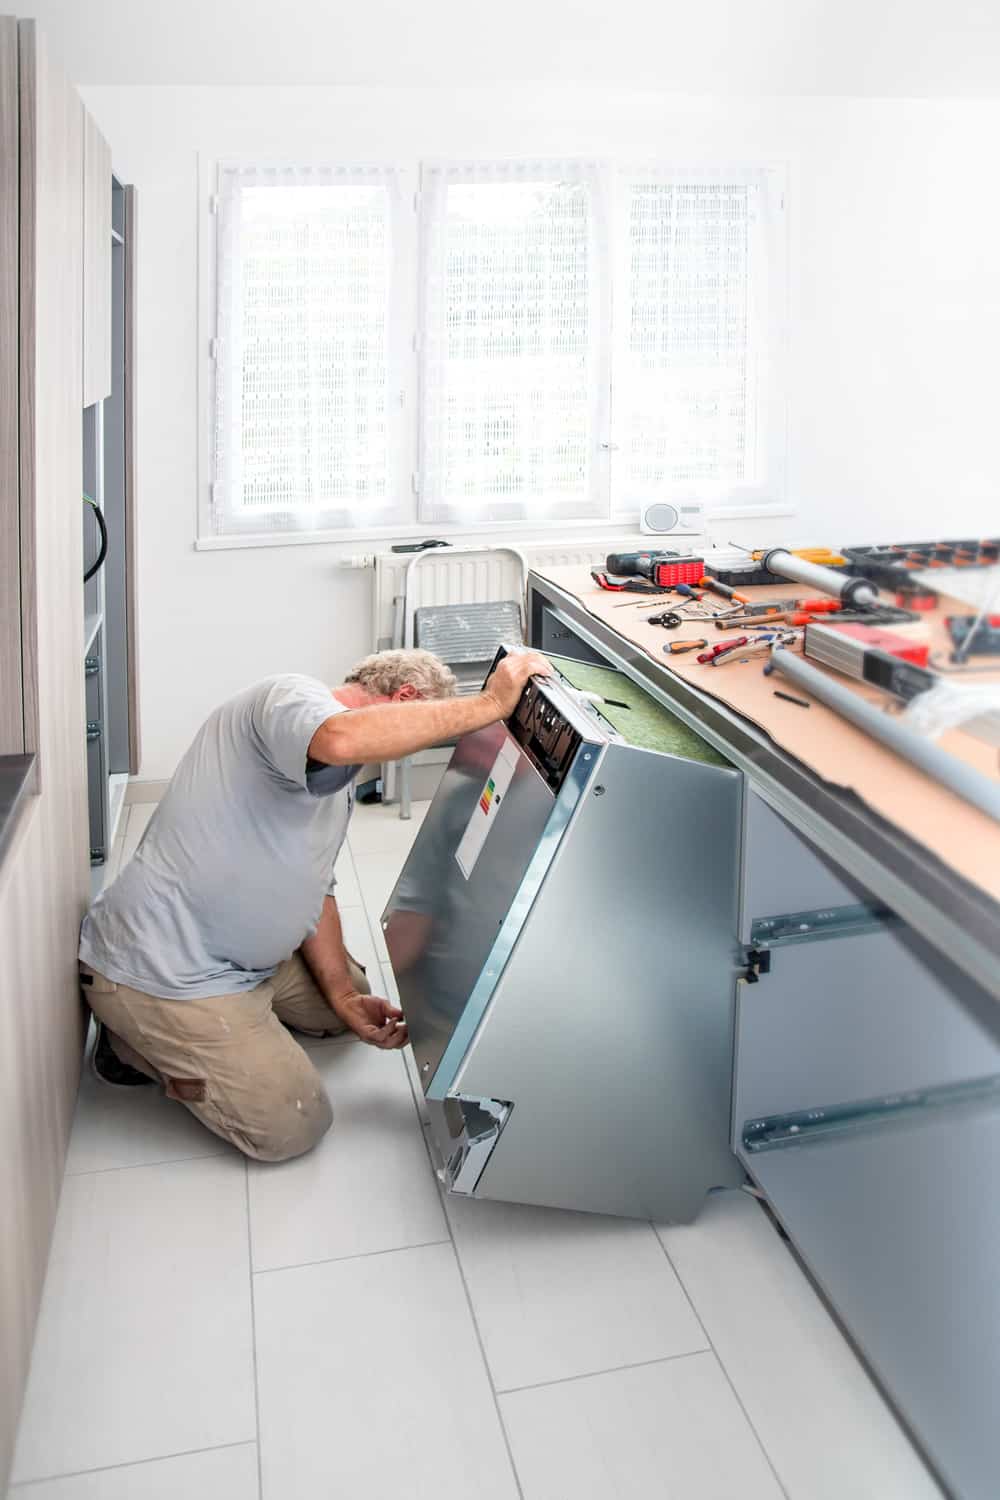 Vertical shot of kitchen fitter technician men, manual worker plumber, mature men gray hair, installing new appliance integrated furniture dishwasher in a new kitchen custom made